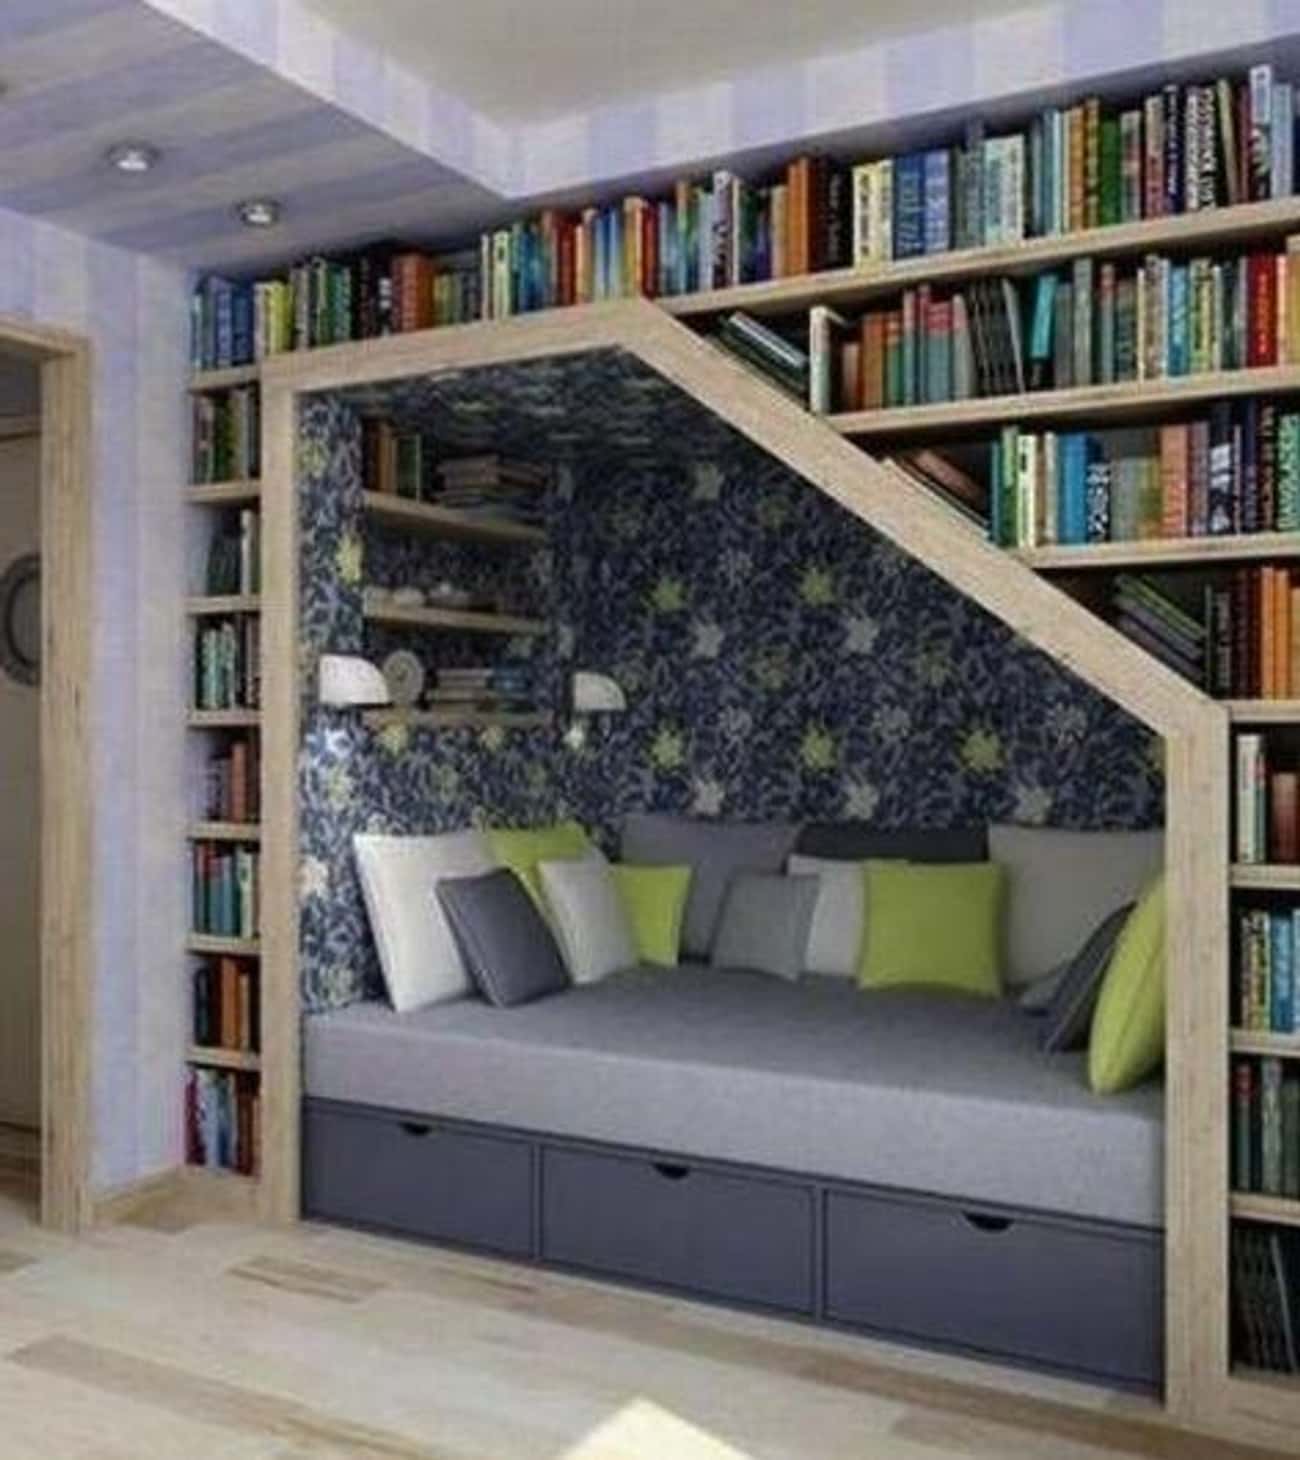 Bring Your Books To Bed